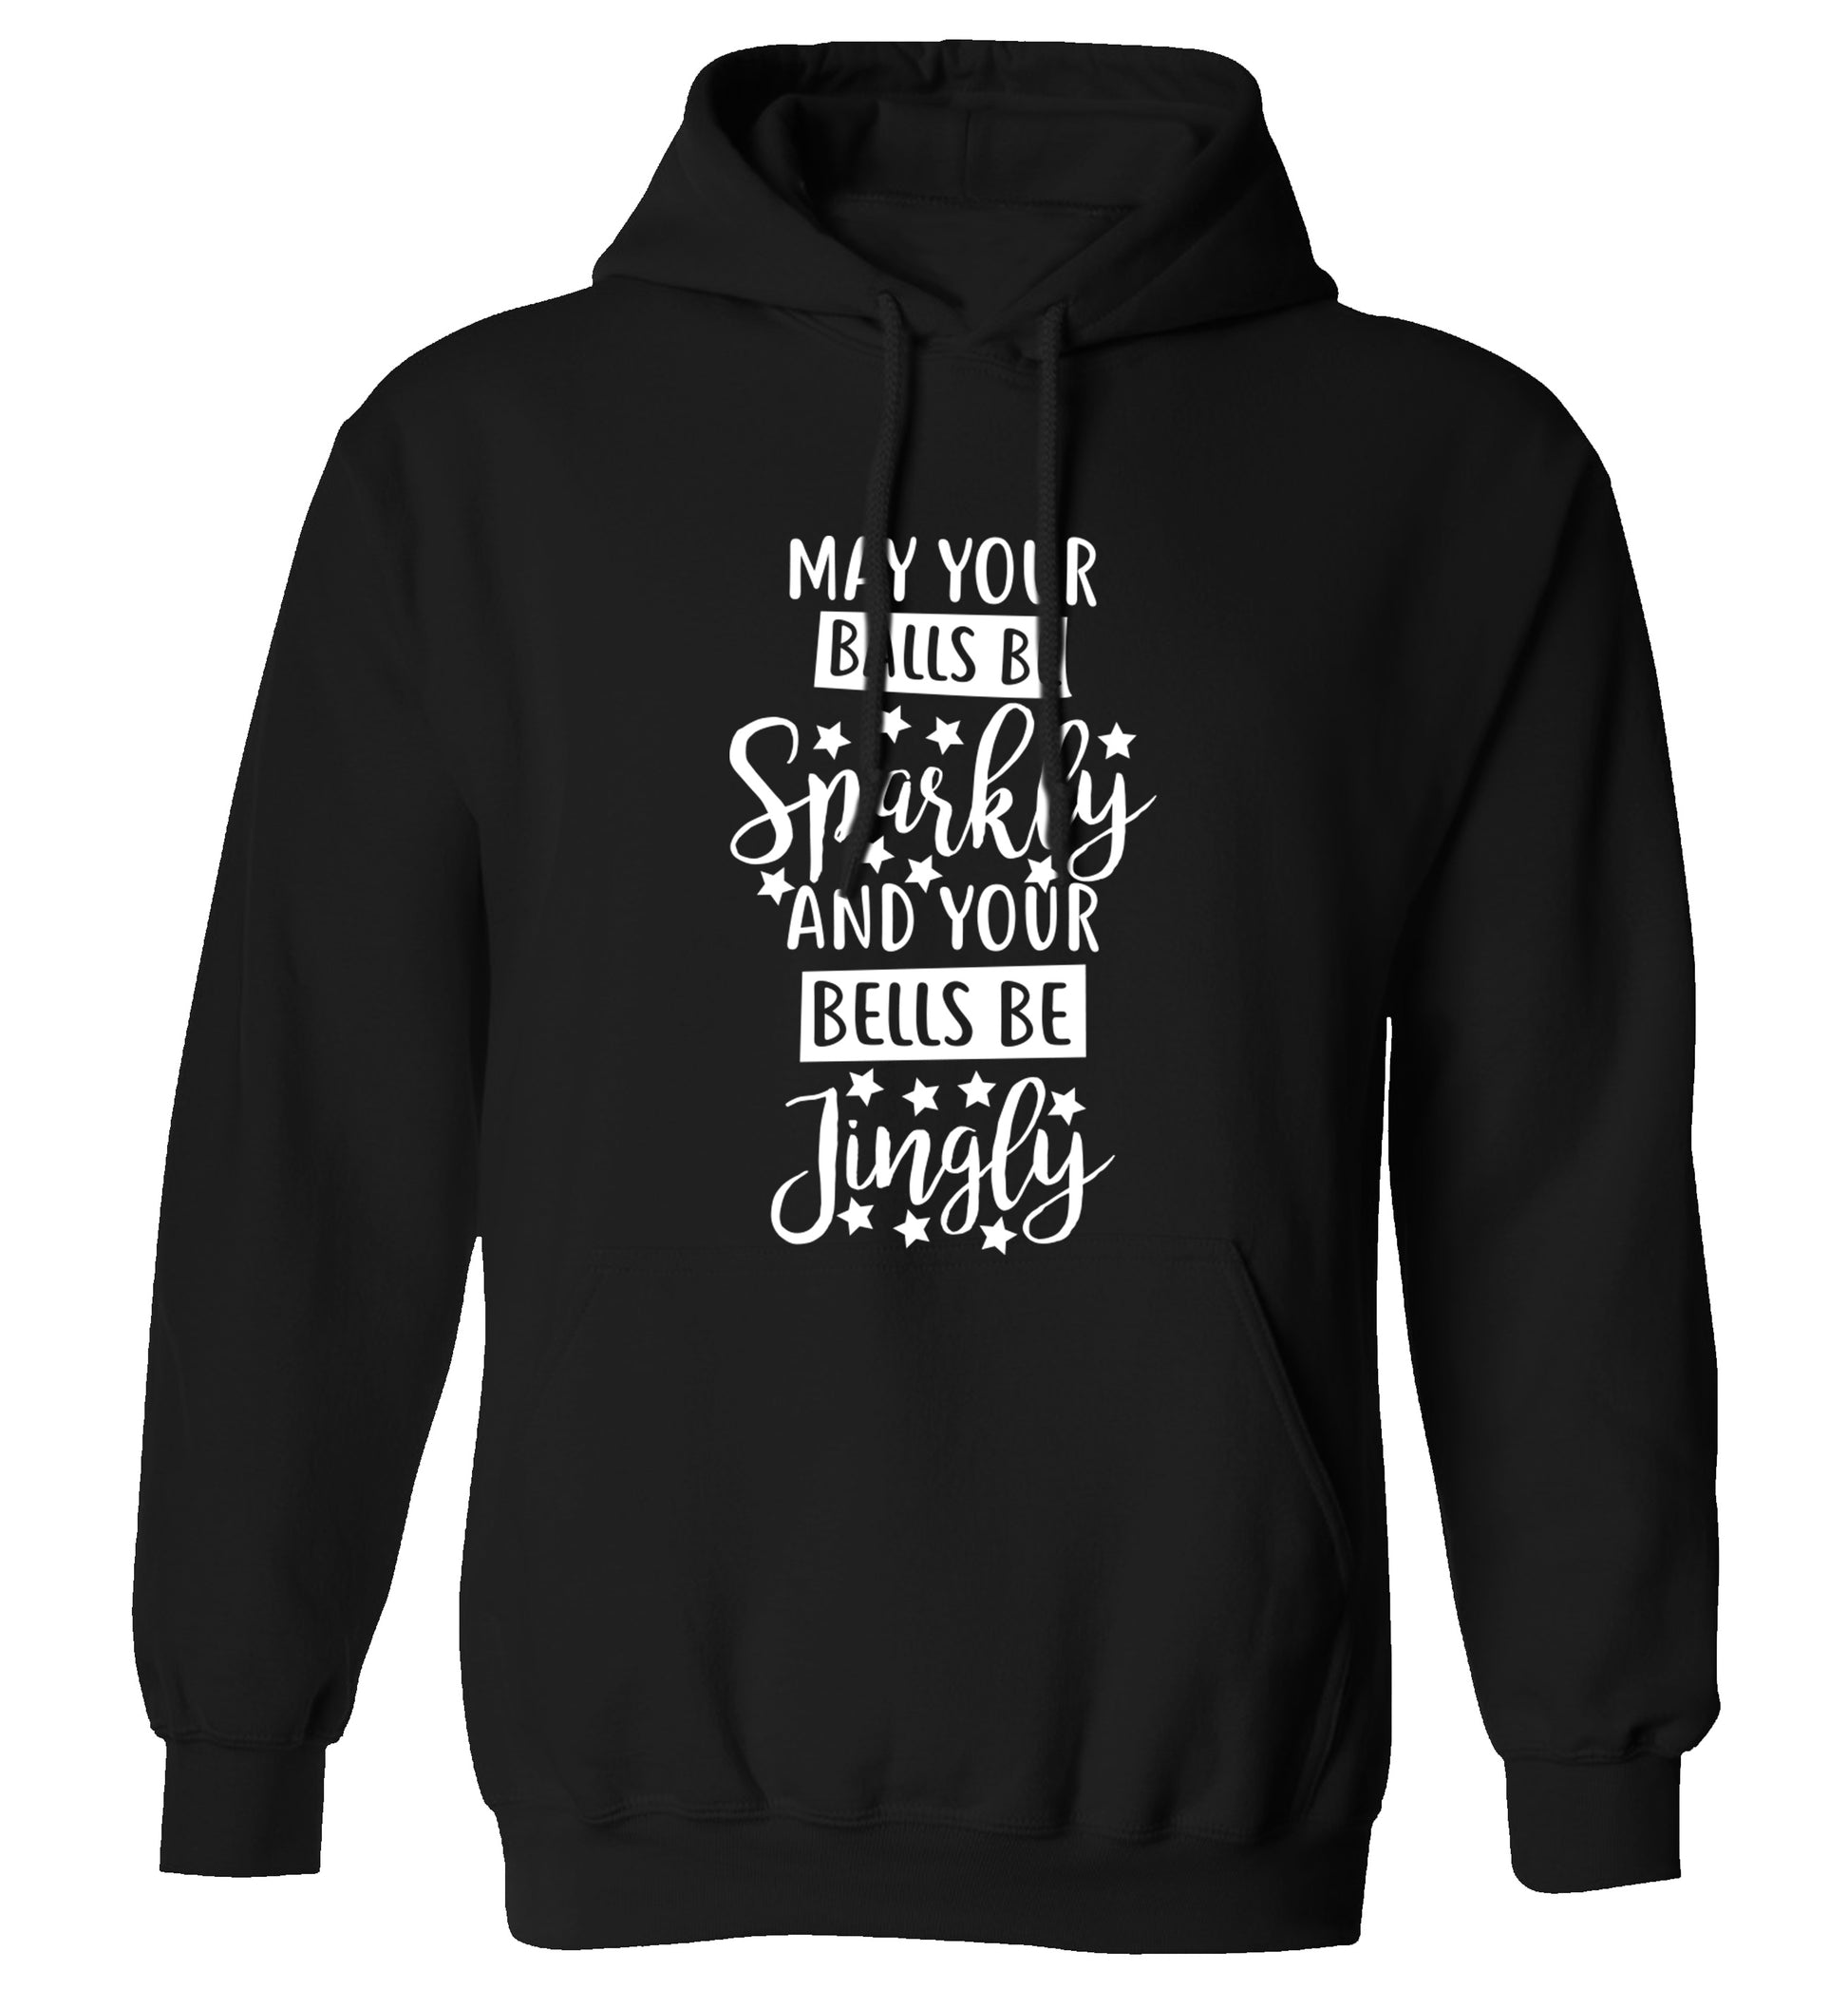 May your balls be sparkly and your bells be jingly adults unisex black hoodie 2XL